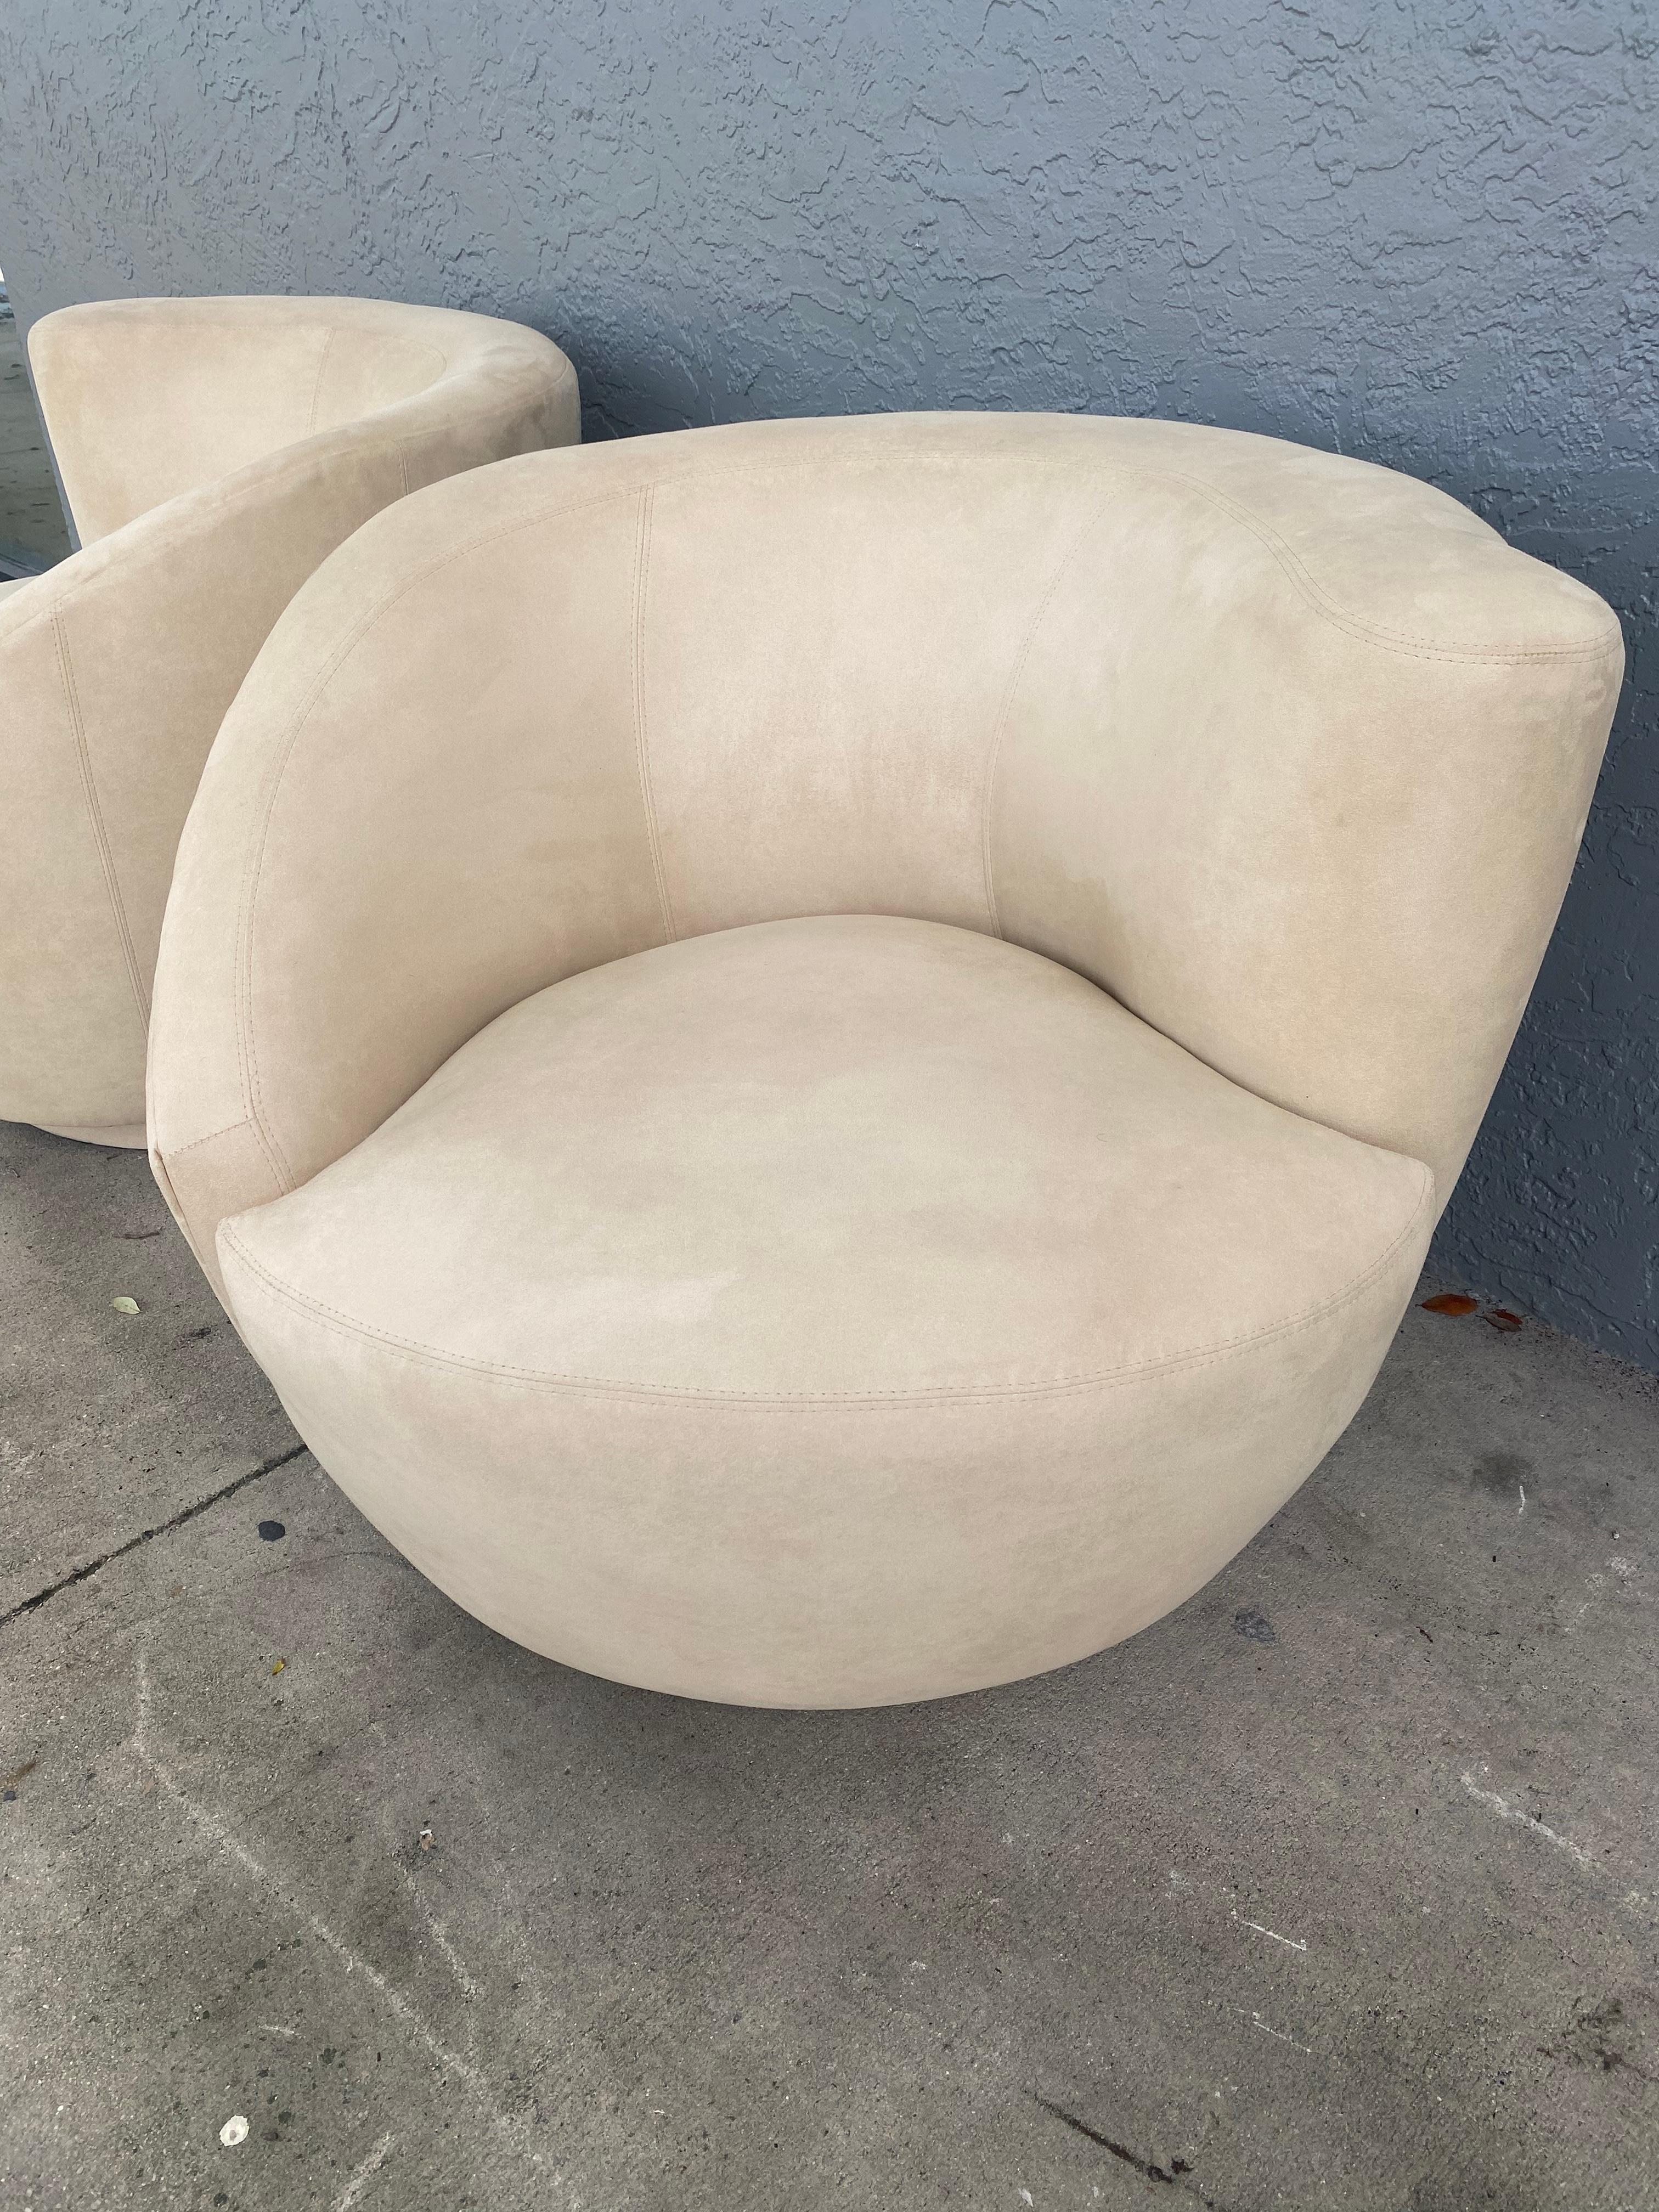 Upholstery 1980s Light Beige Directional Nautilus Swivel Chairs, Set of 2 For Sale